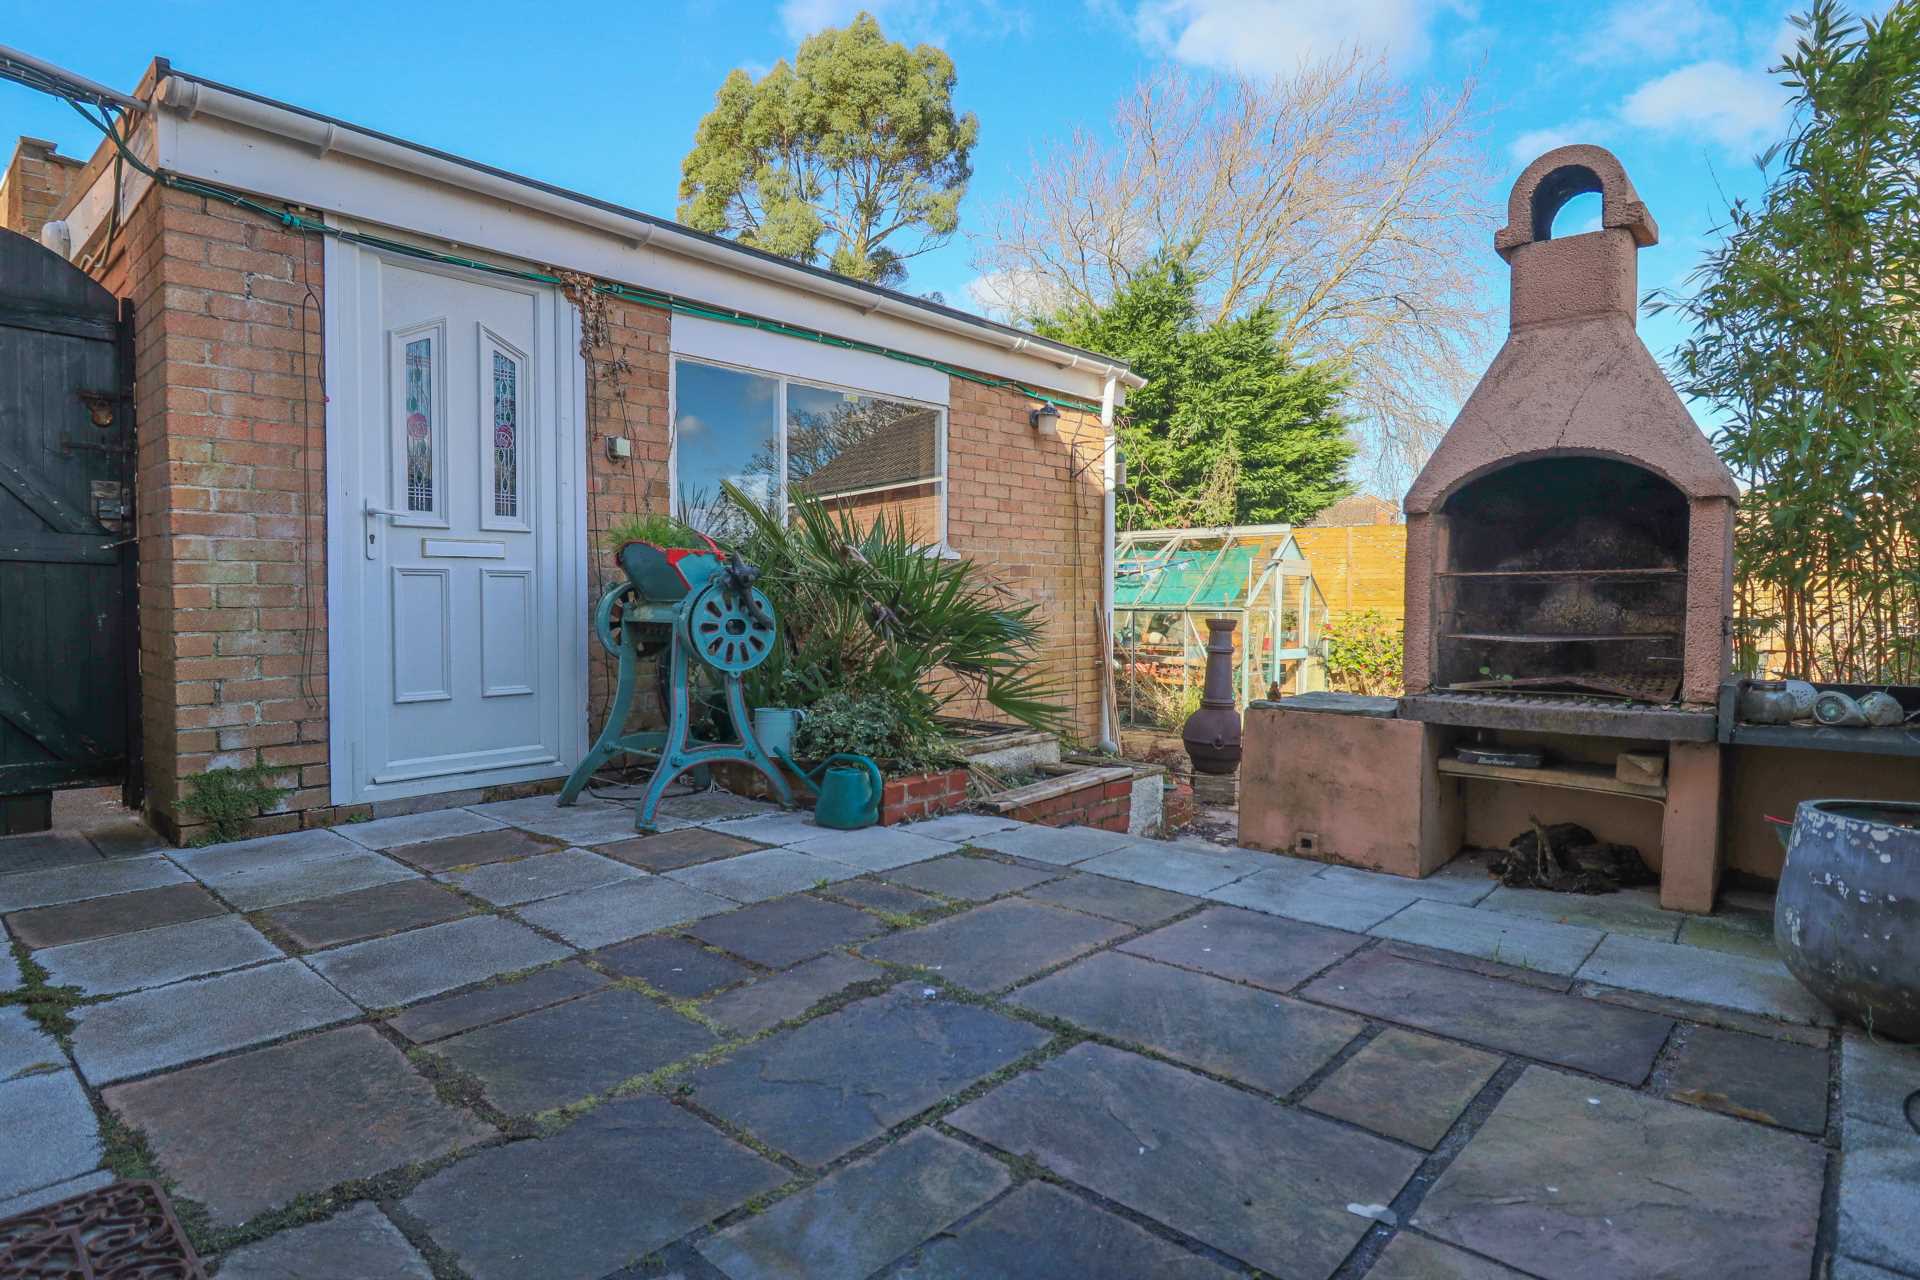 Willowdown - Ideal First Time Buy - North Worle, Image 11